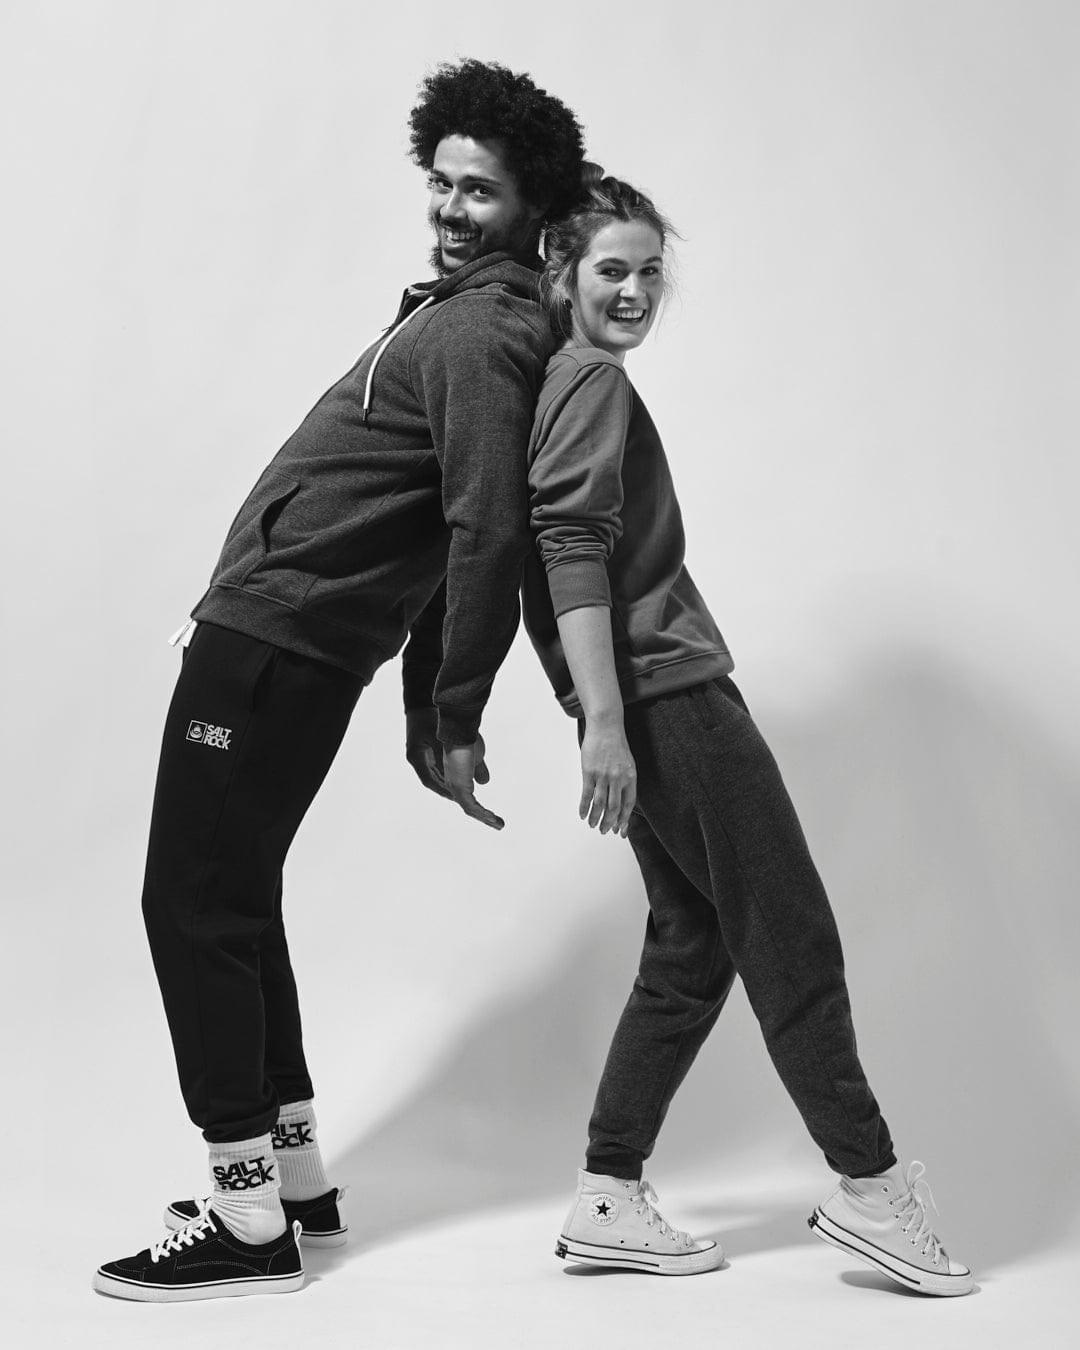 Two people smiling and leaning back to back, wearing casual hoodies with an elasticated draw cord waist and sneakers. - Two people smiling and leaning back to back, wearing Saltrock Velator - Womens Jogger - Blue hoodies with an elasticated draw cord waist and sneakers.